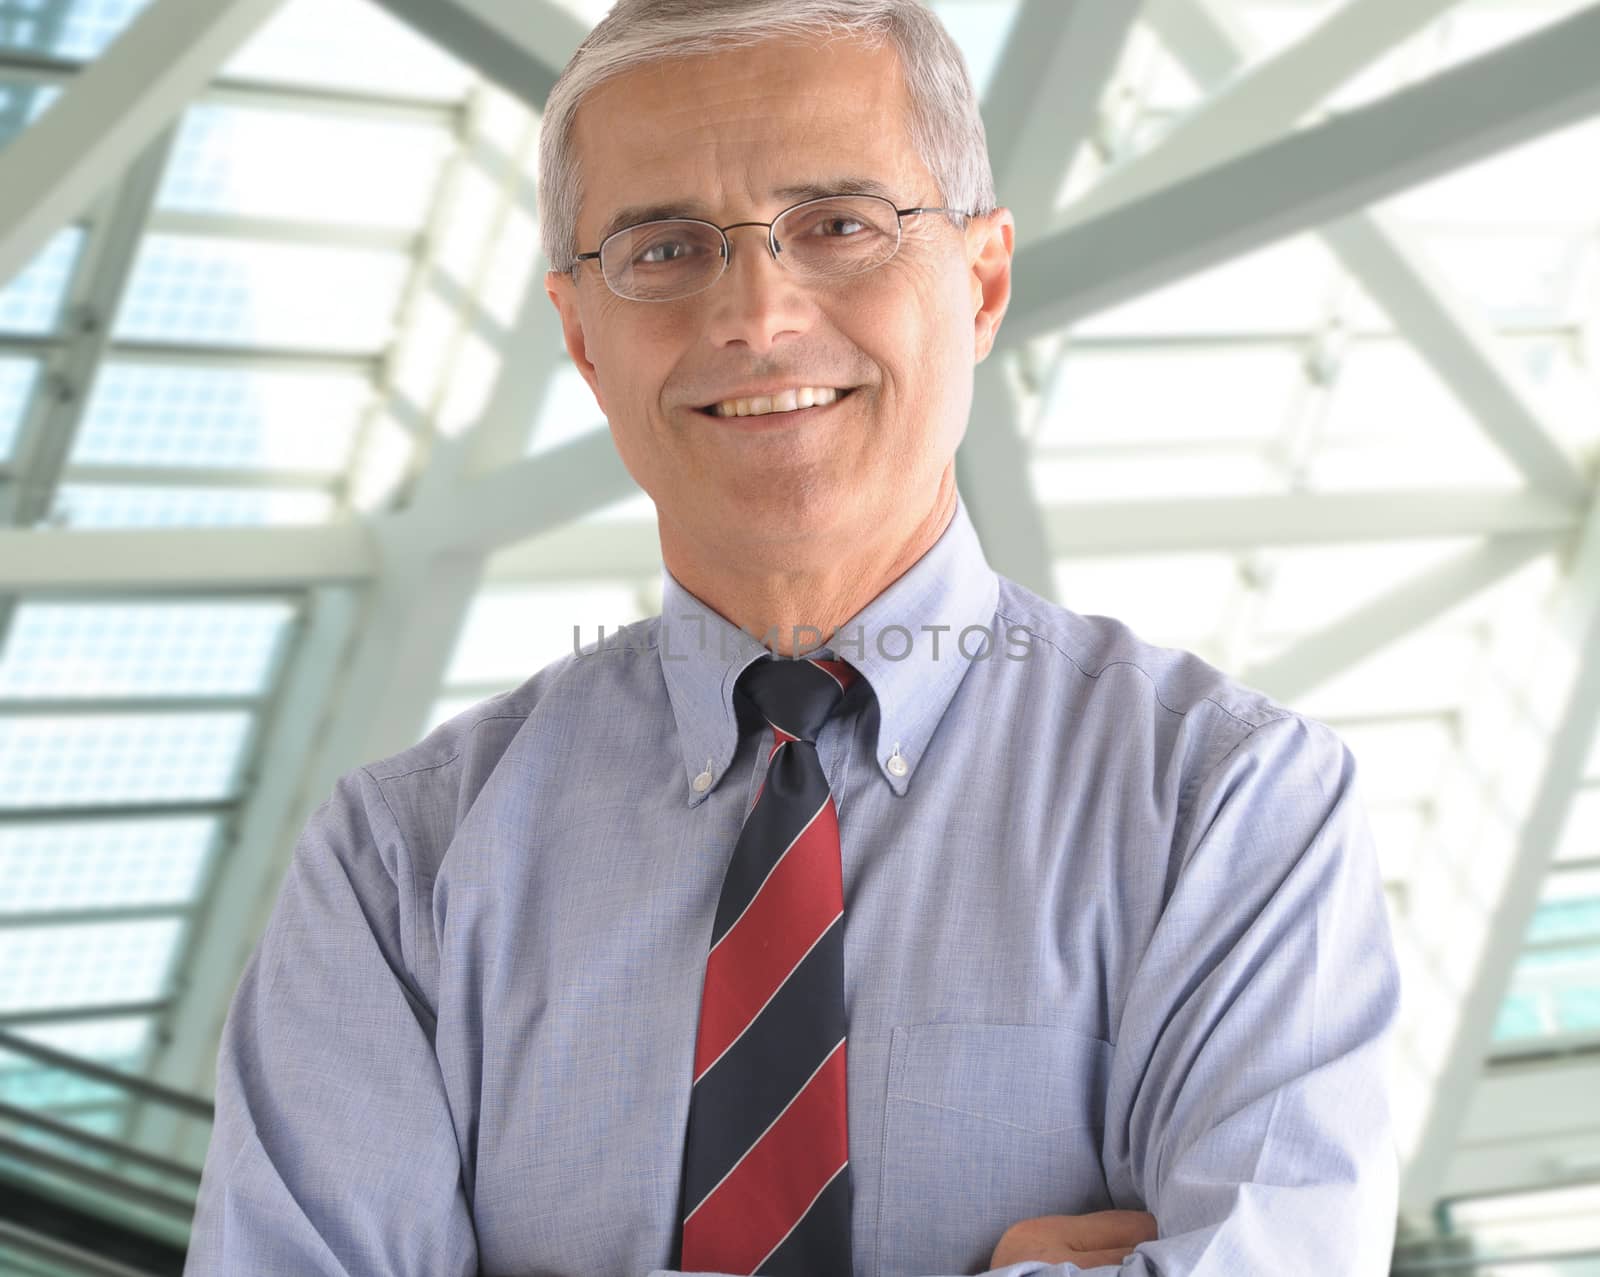 Middle aged businessman standing in modern office lobby with his arms crossed. Close up in square format with man smiling at the camera.